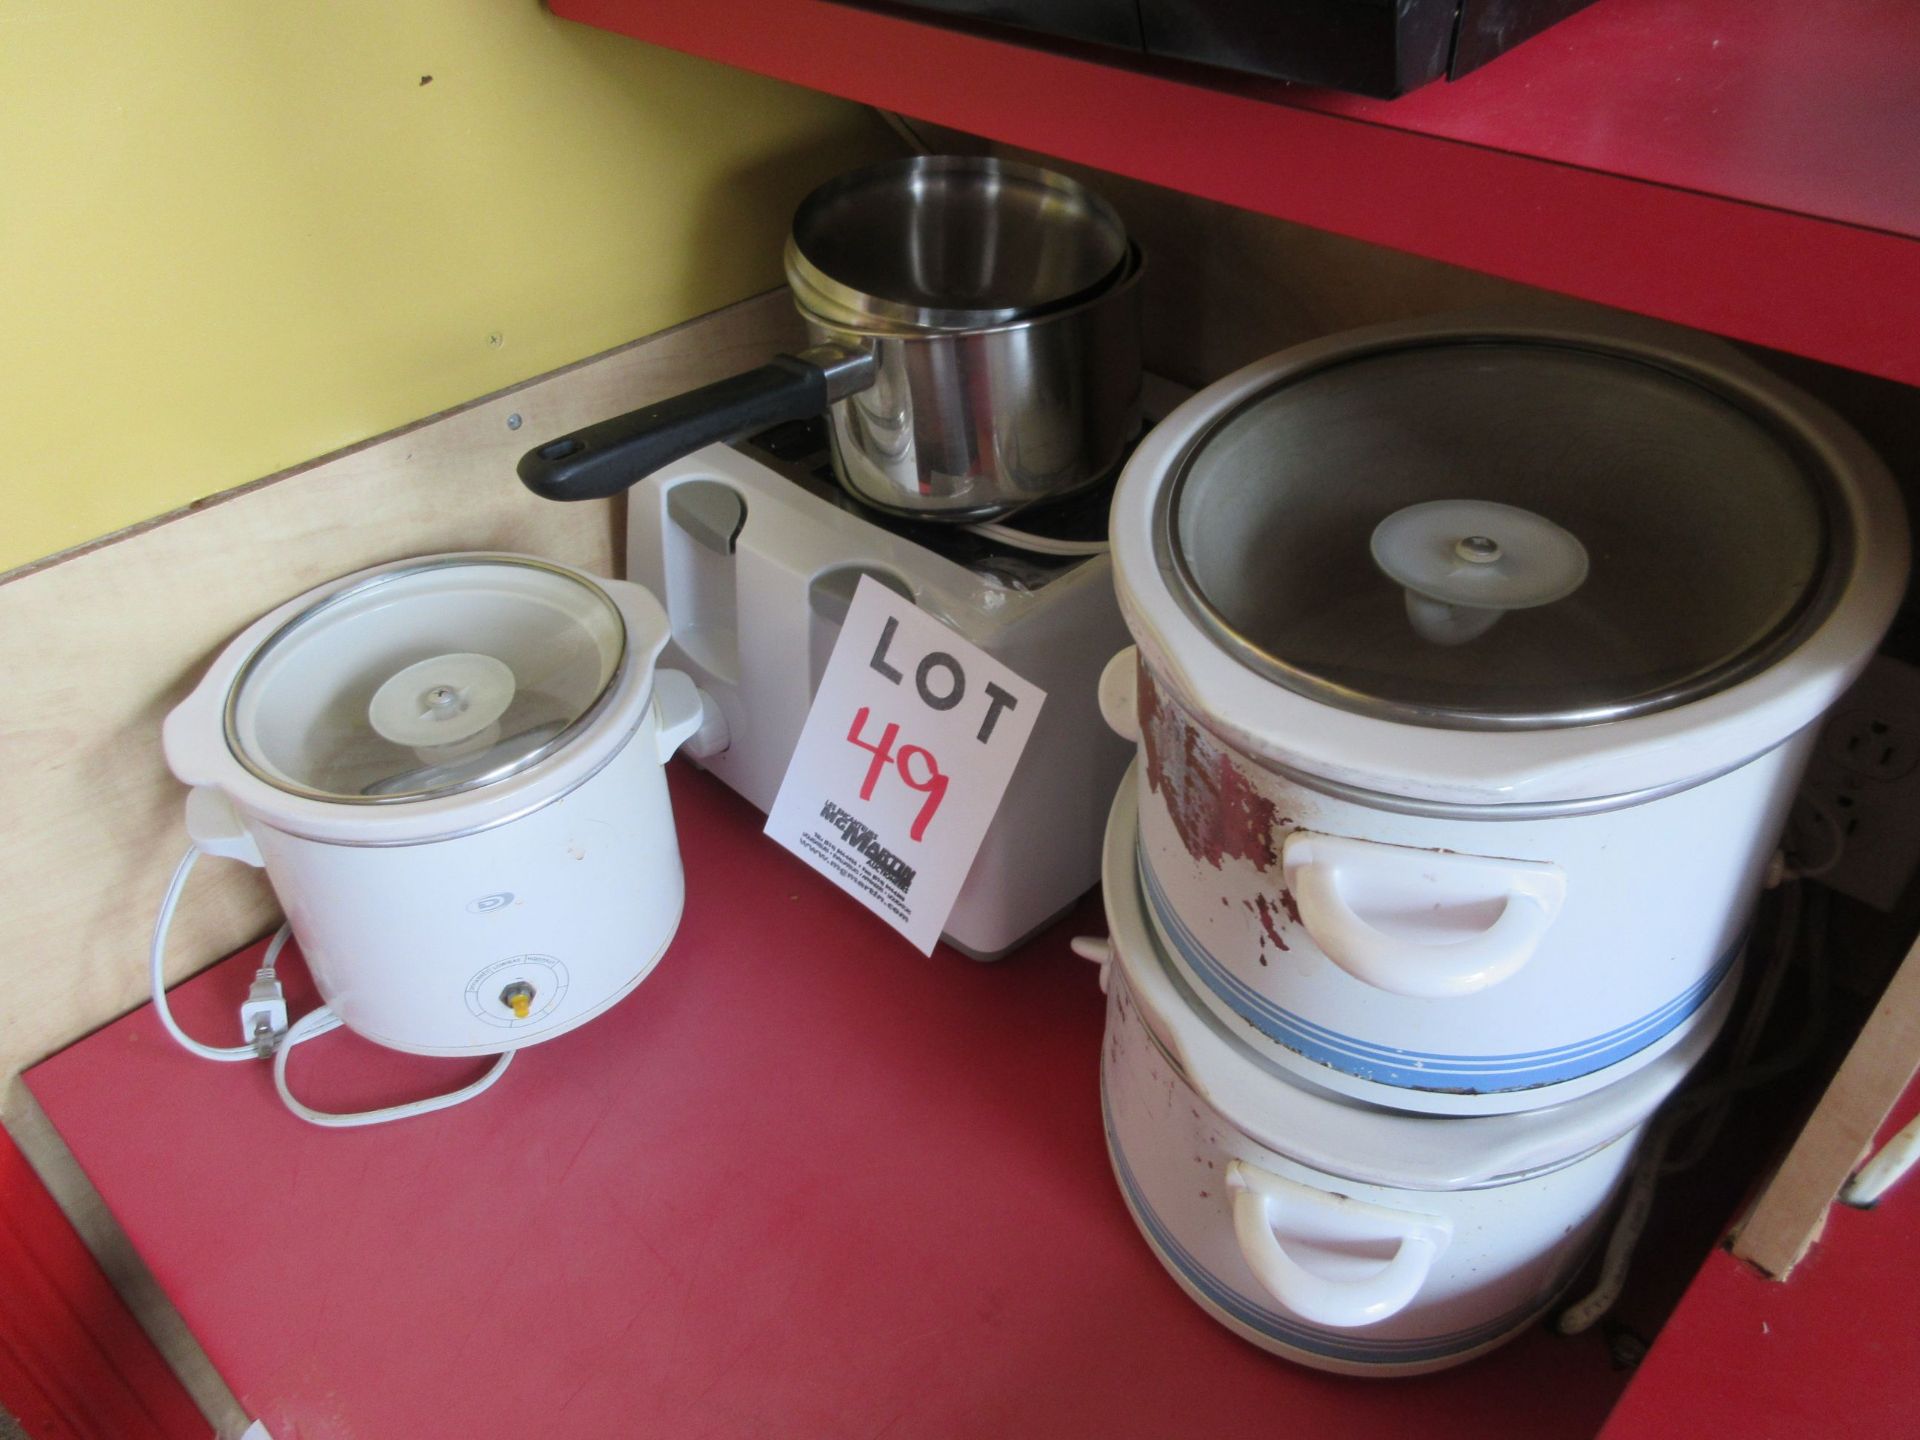 LOT including microwave oven, toaster, etc. - Image 3 of 3